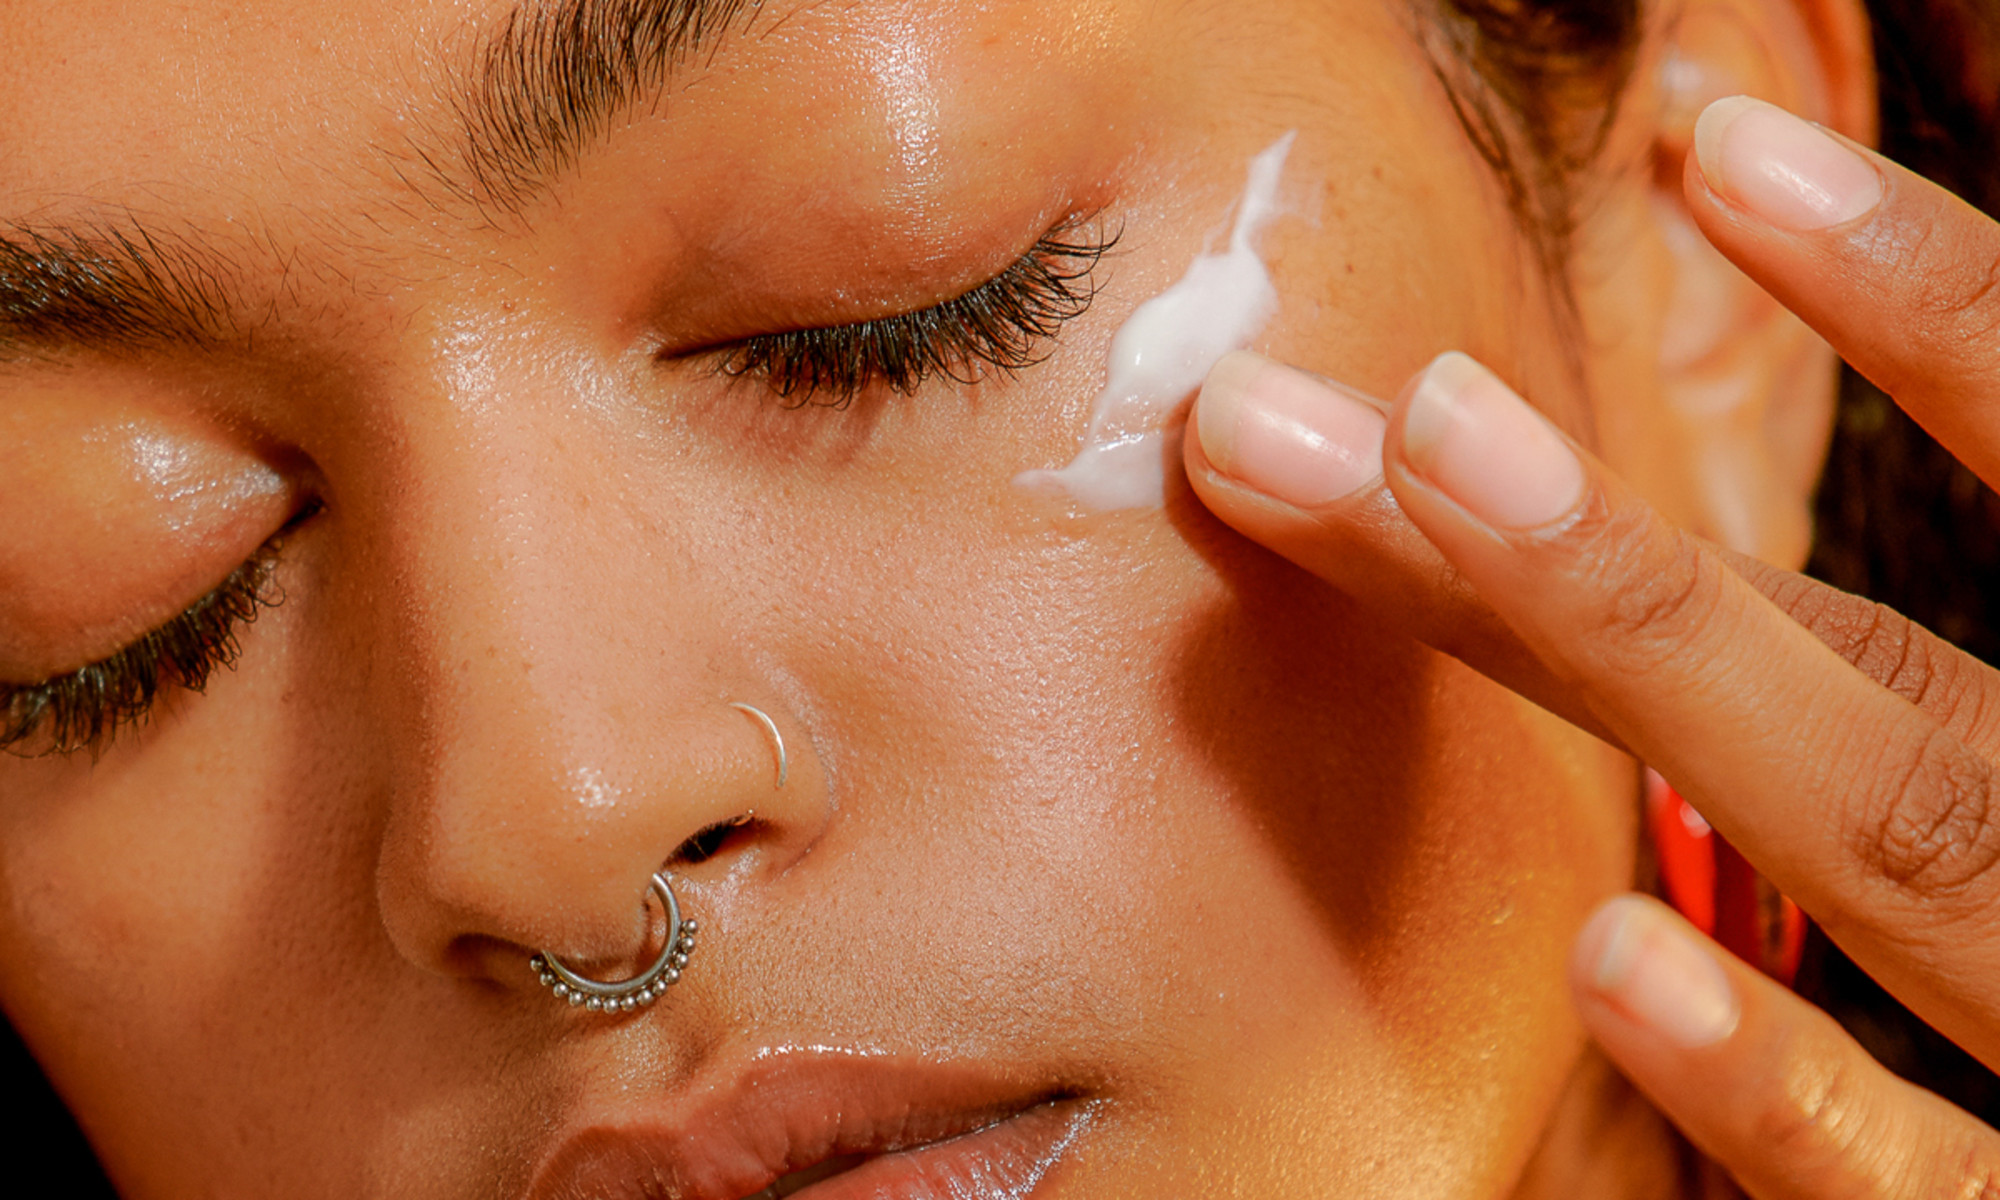 Found: 3 Common Skin Care Myths That Make Experts Absolutely Cringe